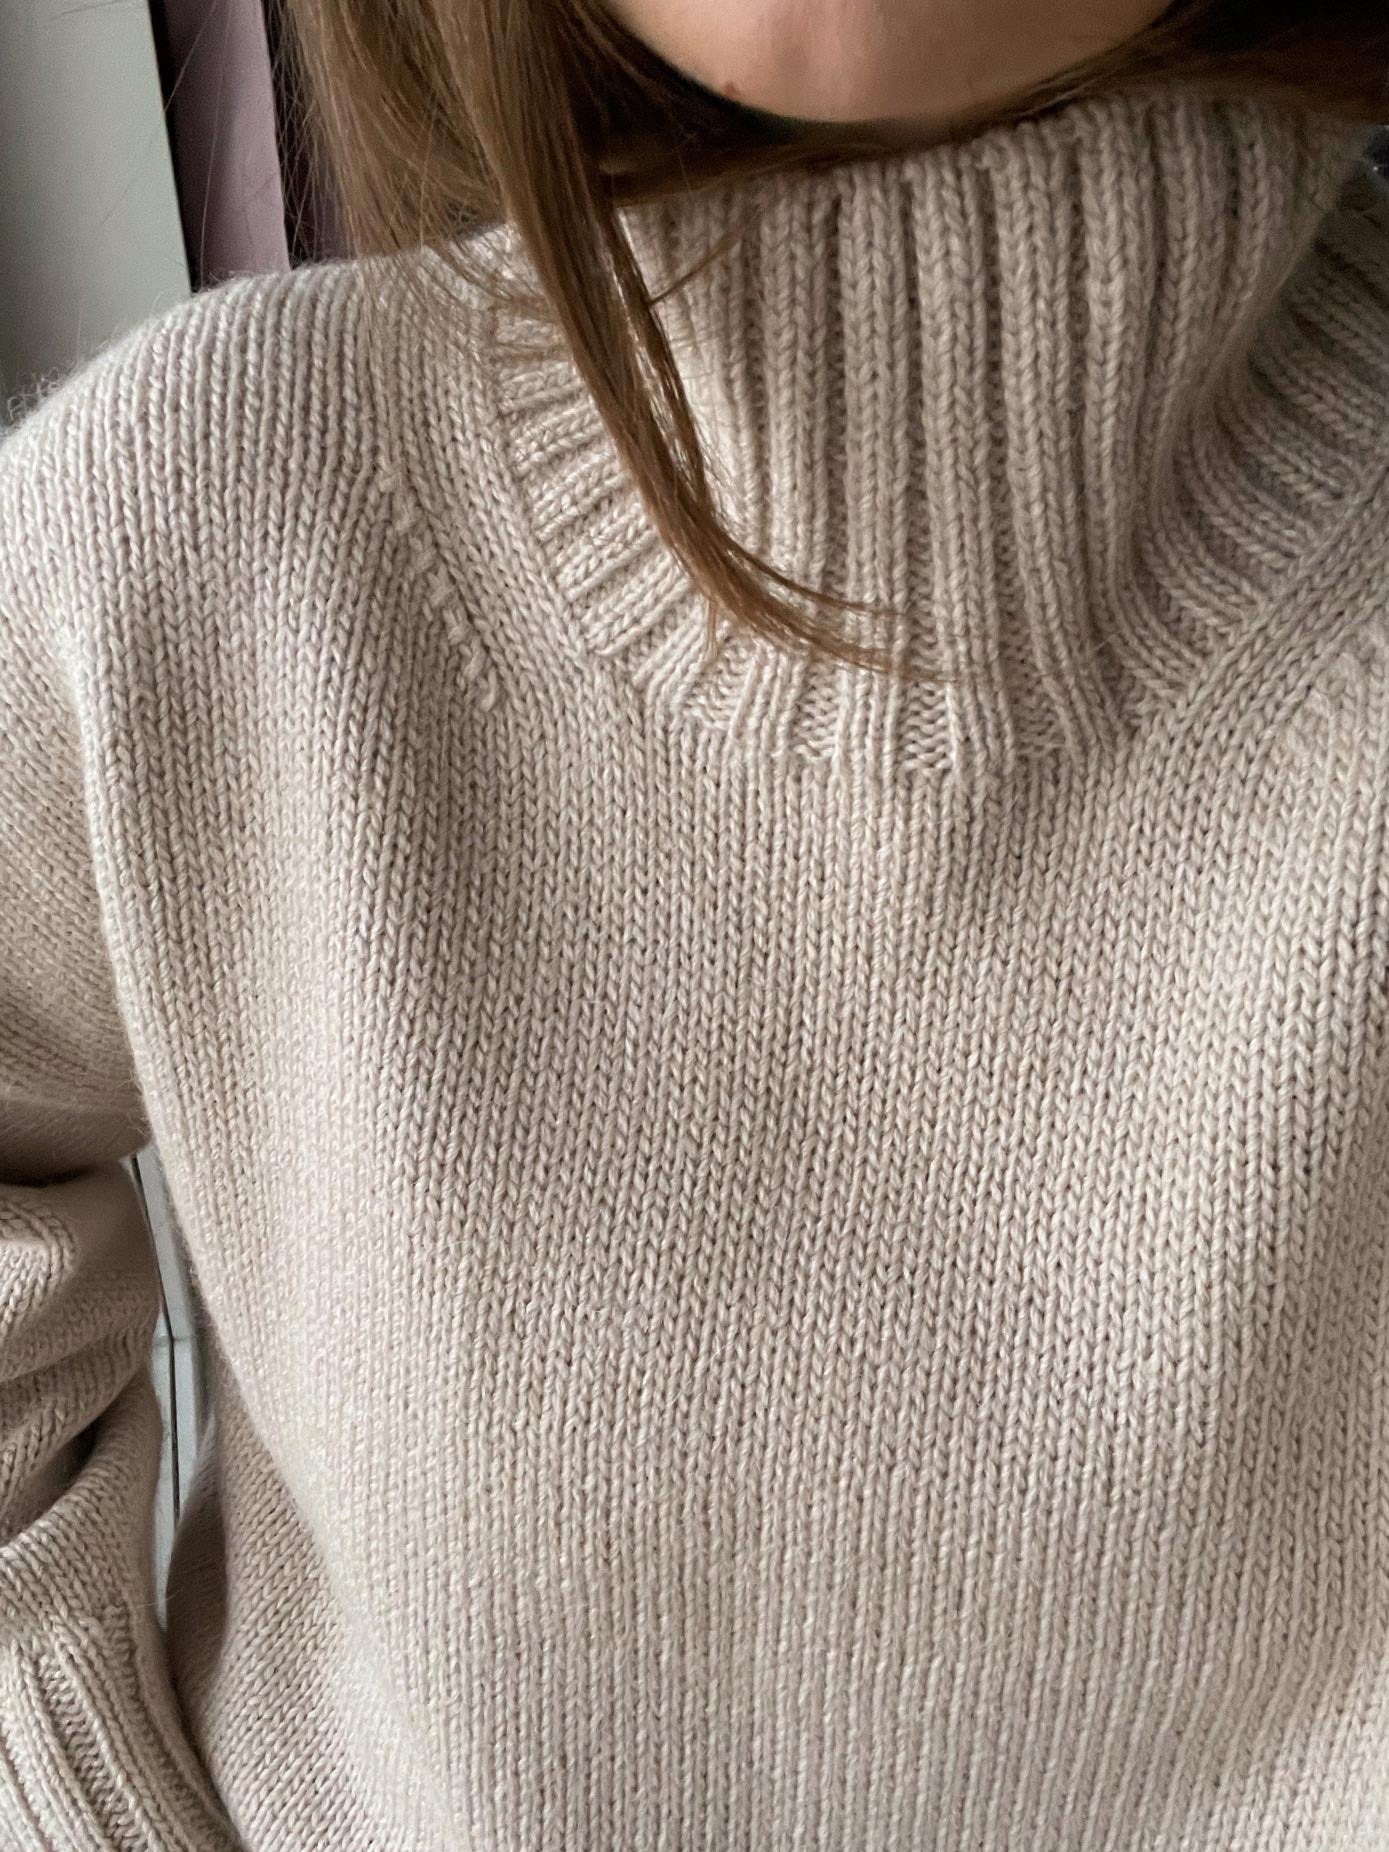 Cecil Sweater knitting guide for comfortable oversized fit